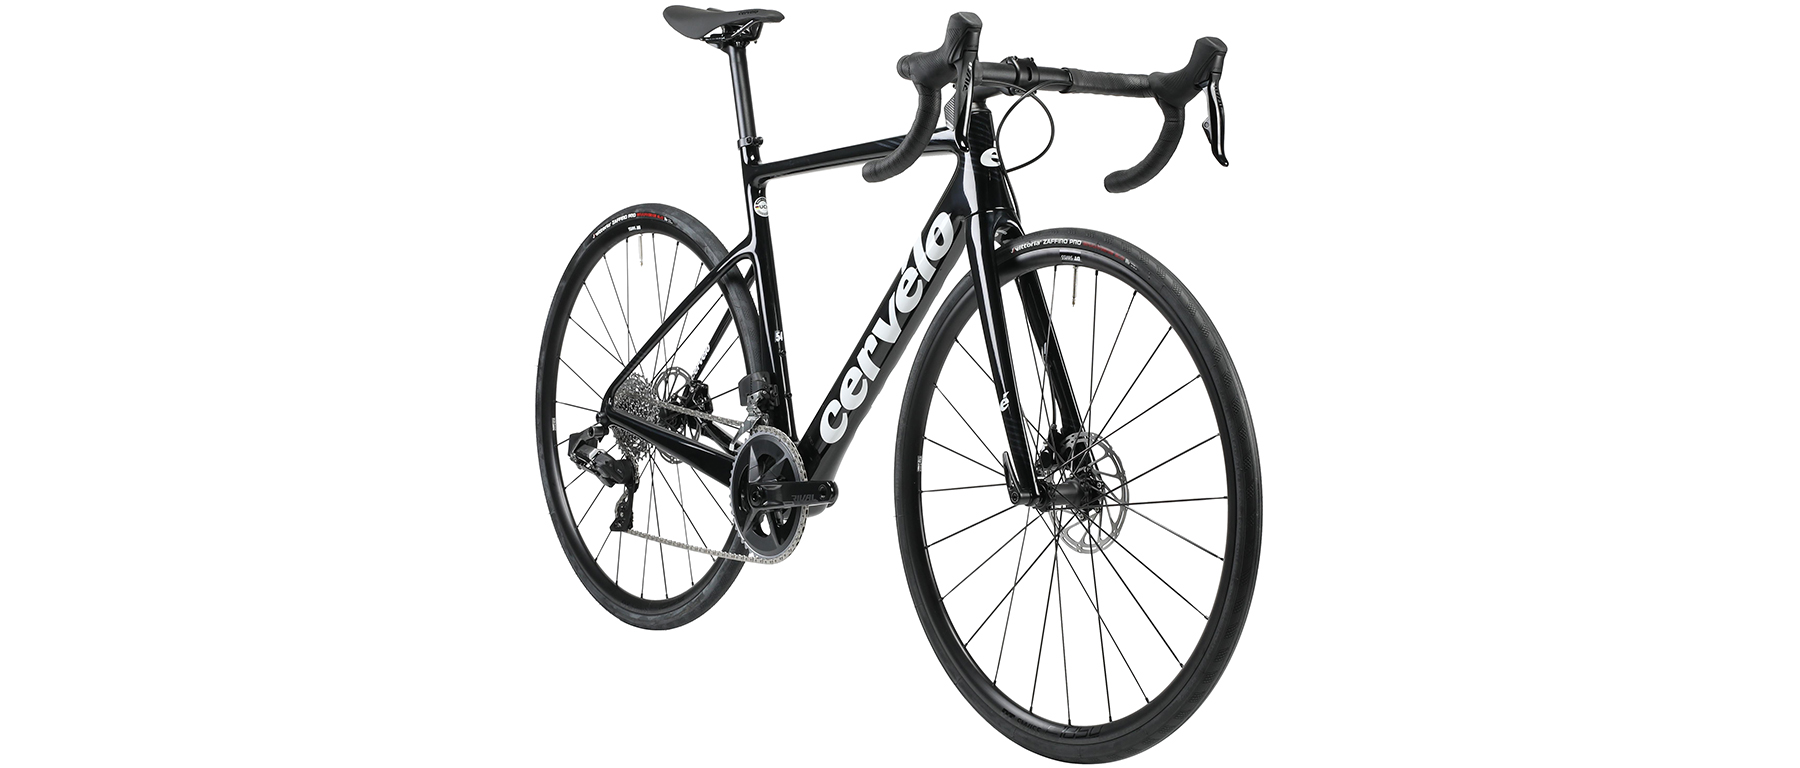 Cervelo Caledonia Rival AXS Bicycle